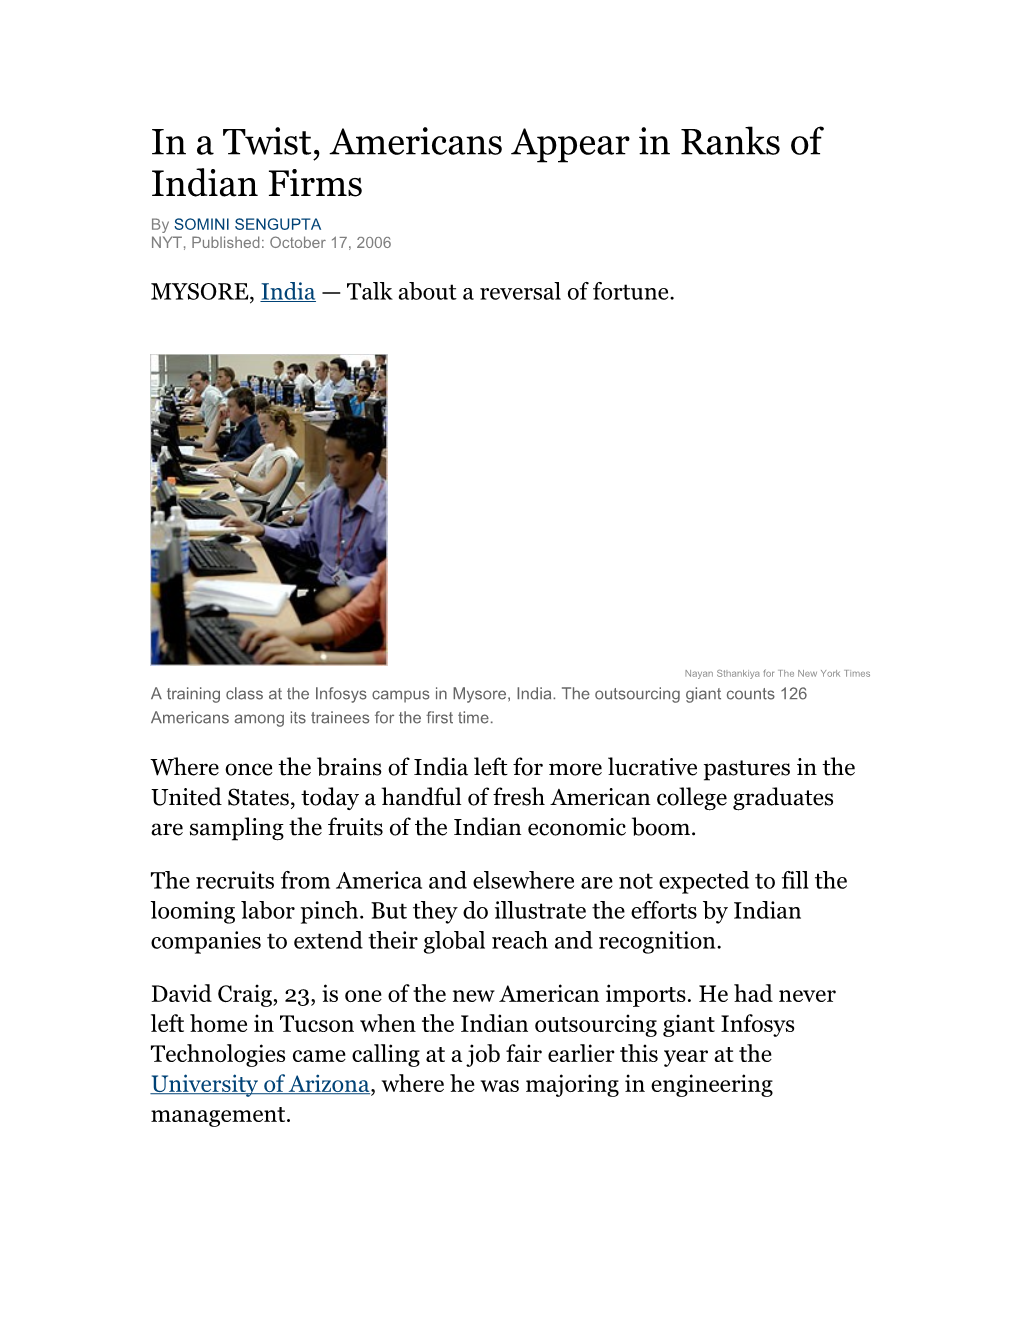 In a Twist, Americans Appear in Ranks of Indian Firms